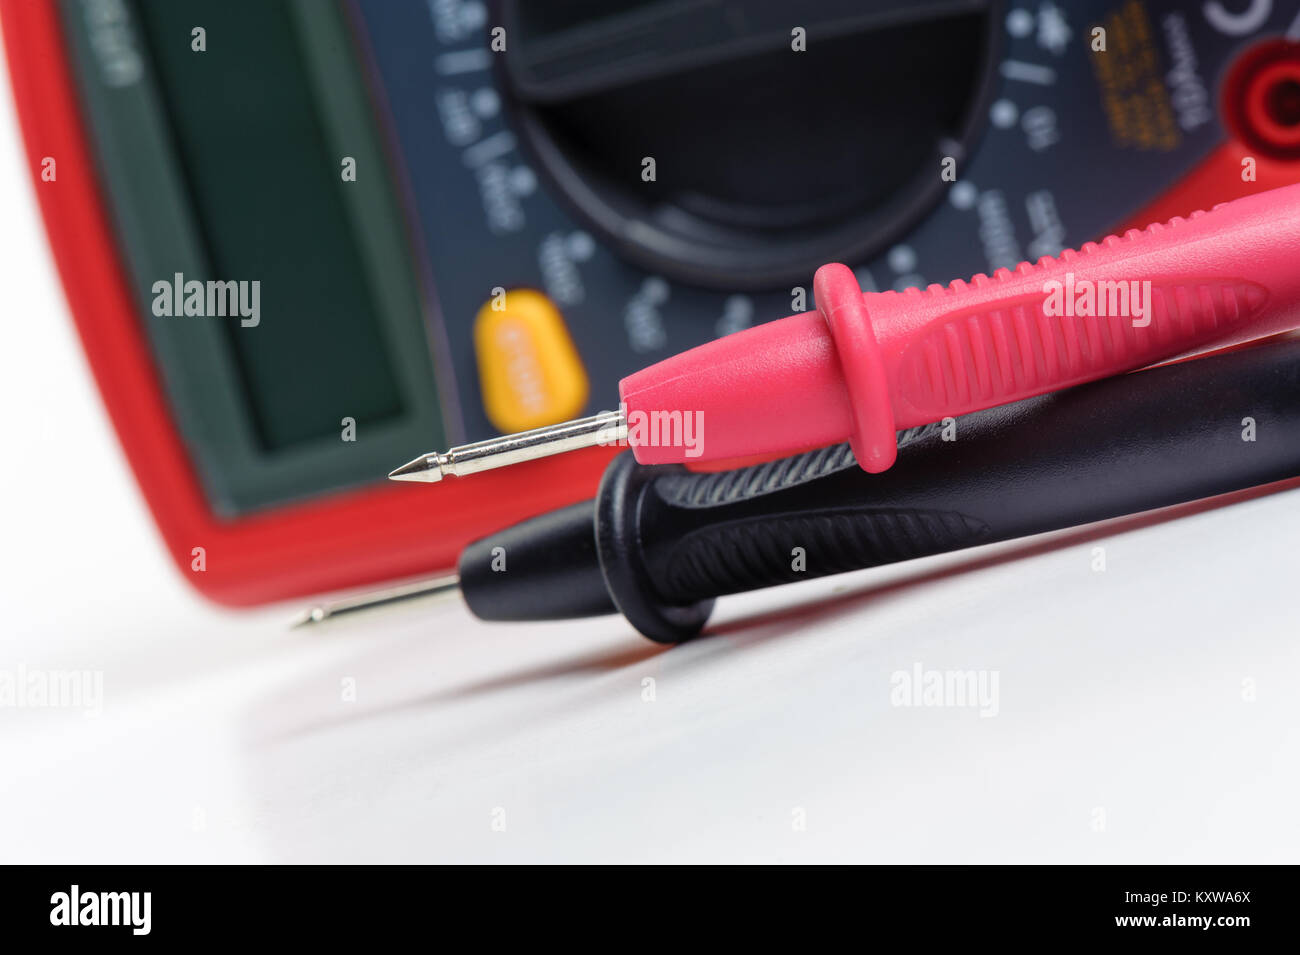 digital multimeter or multitester or Volt-Ohm meter, an electronic  measuring instrument that combines several measurement functions in one  unit Stock Photo - Alamy